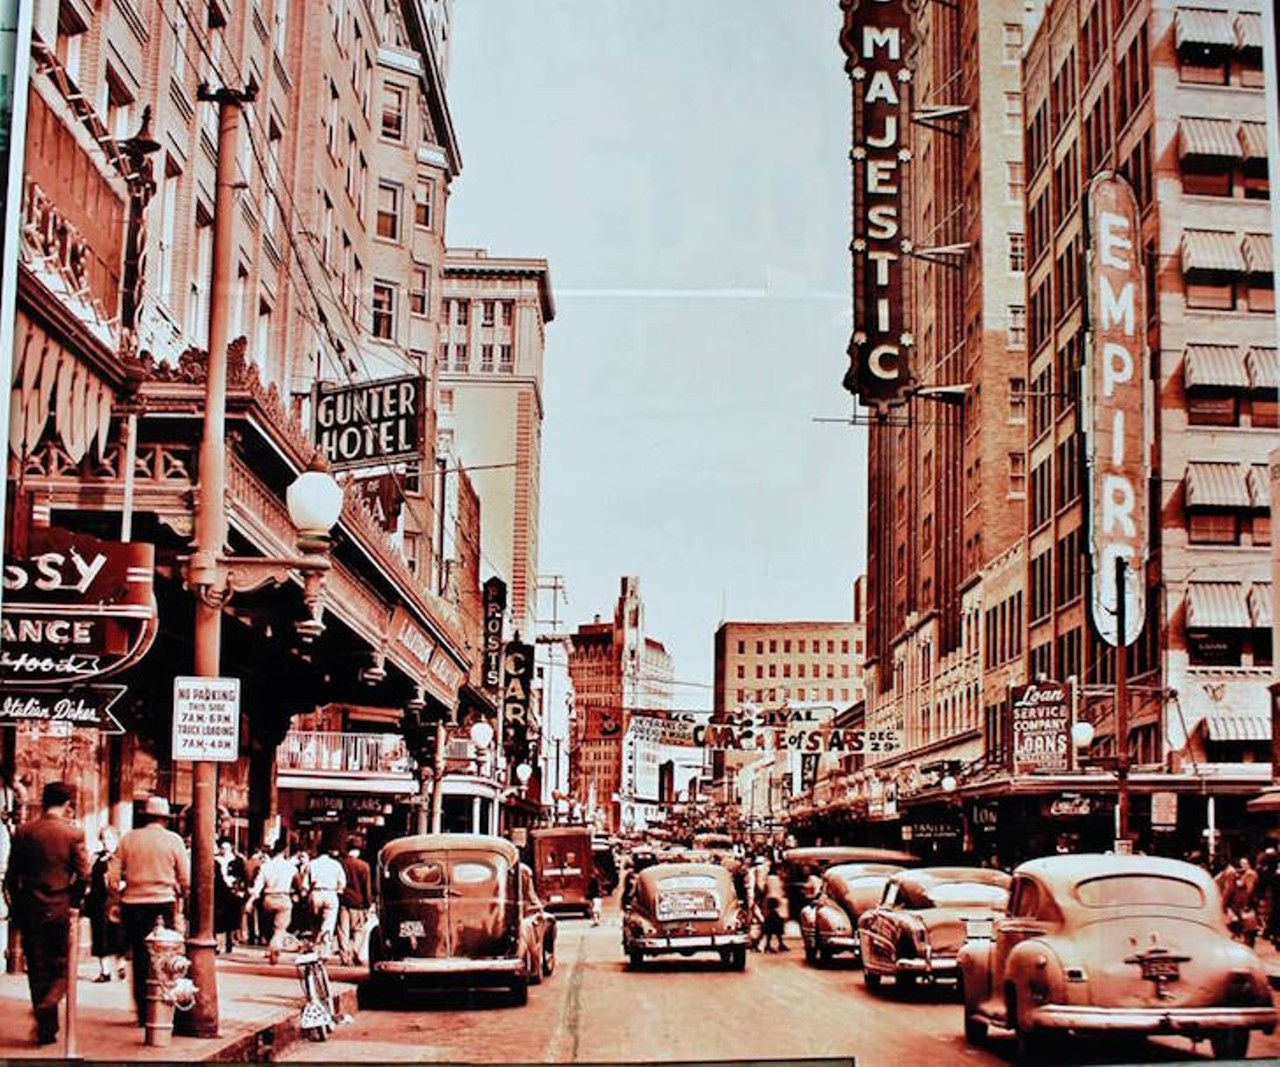 A postcard of Houston Street with the Gunter Hotel on the left, the Magic Theatre on the right, and the Medical Arts Building in the center.